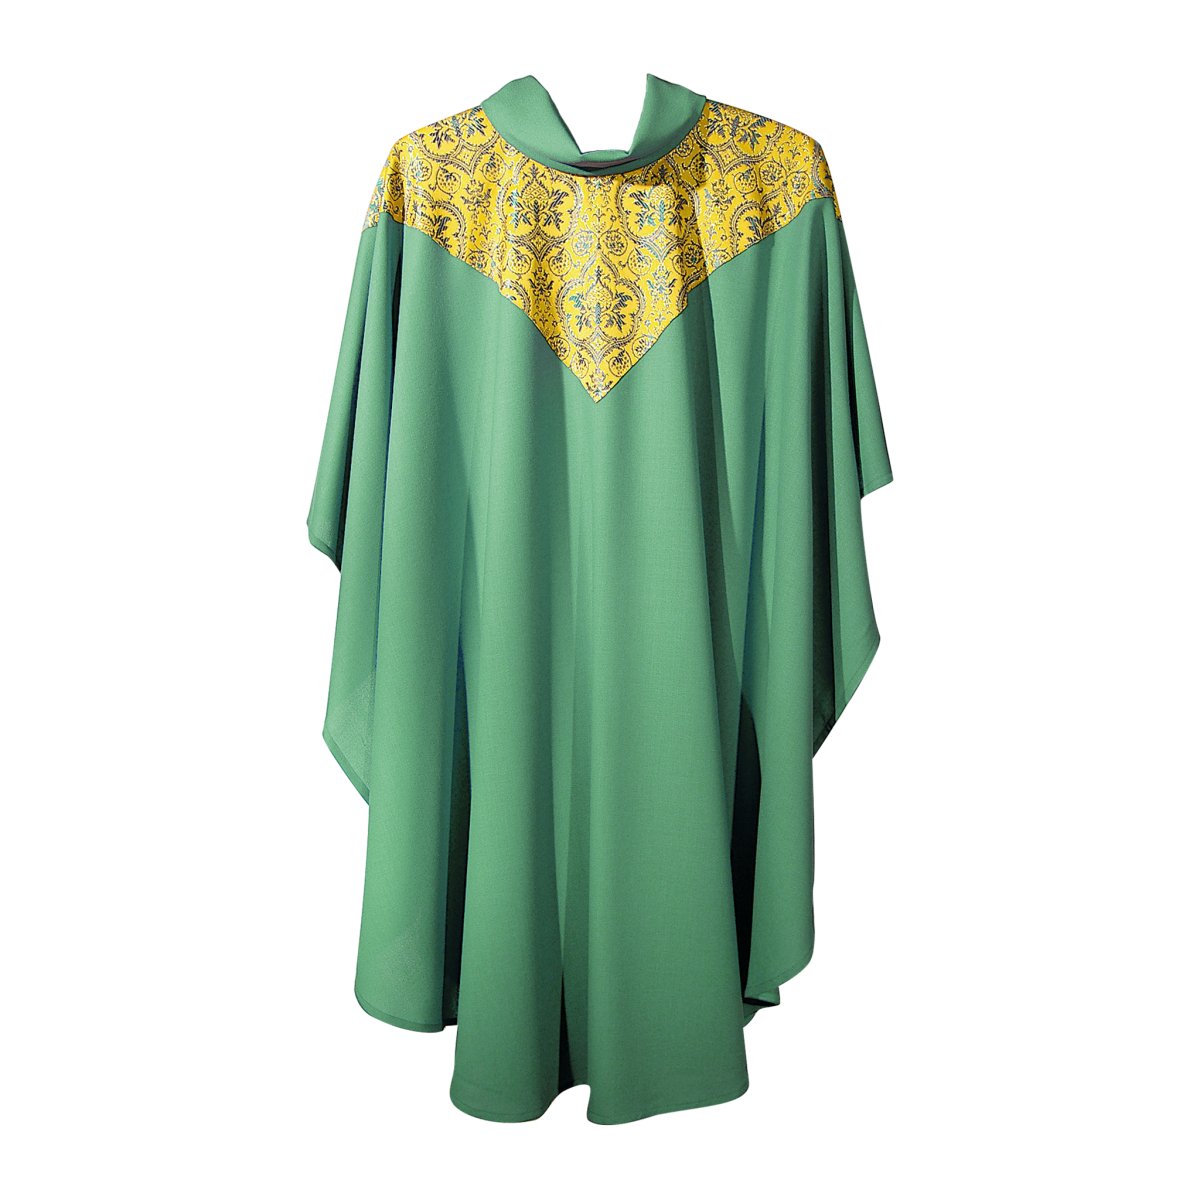 Wool Crepe V Panel Chasuble - Hayes & Finch